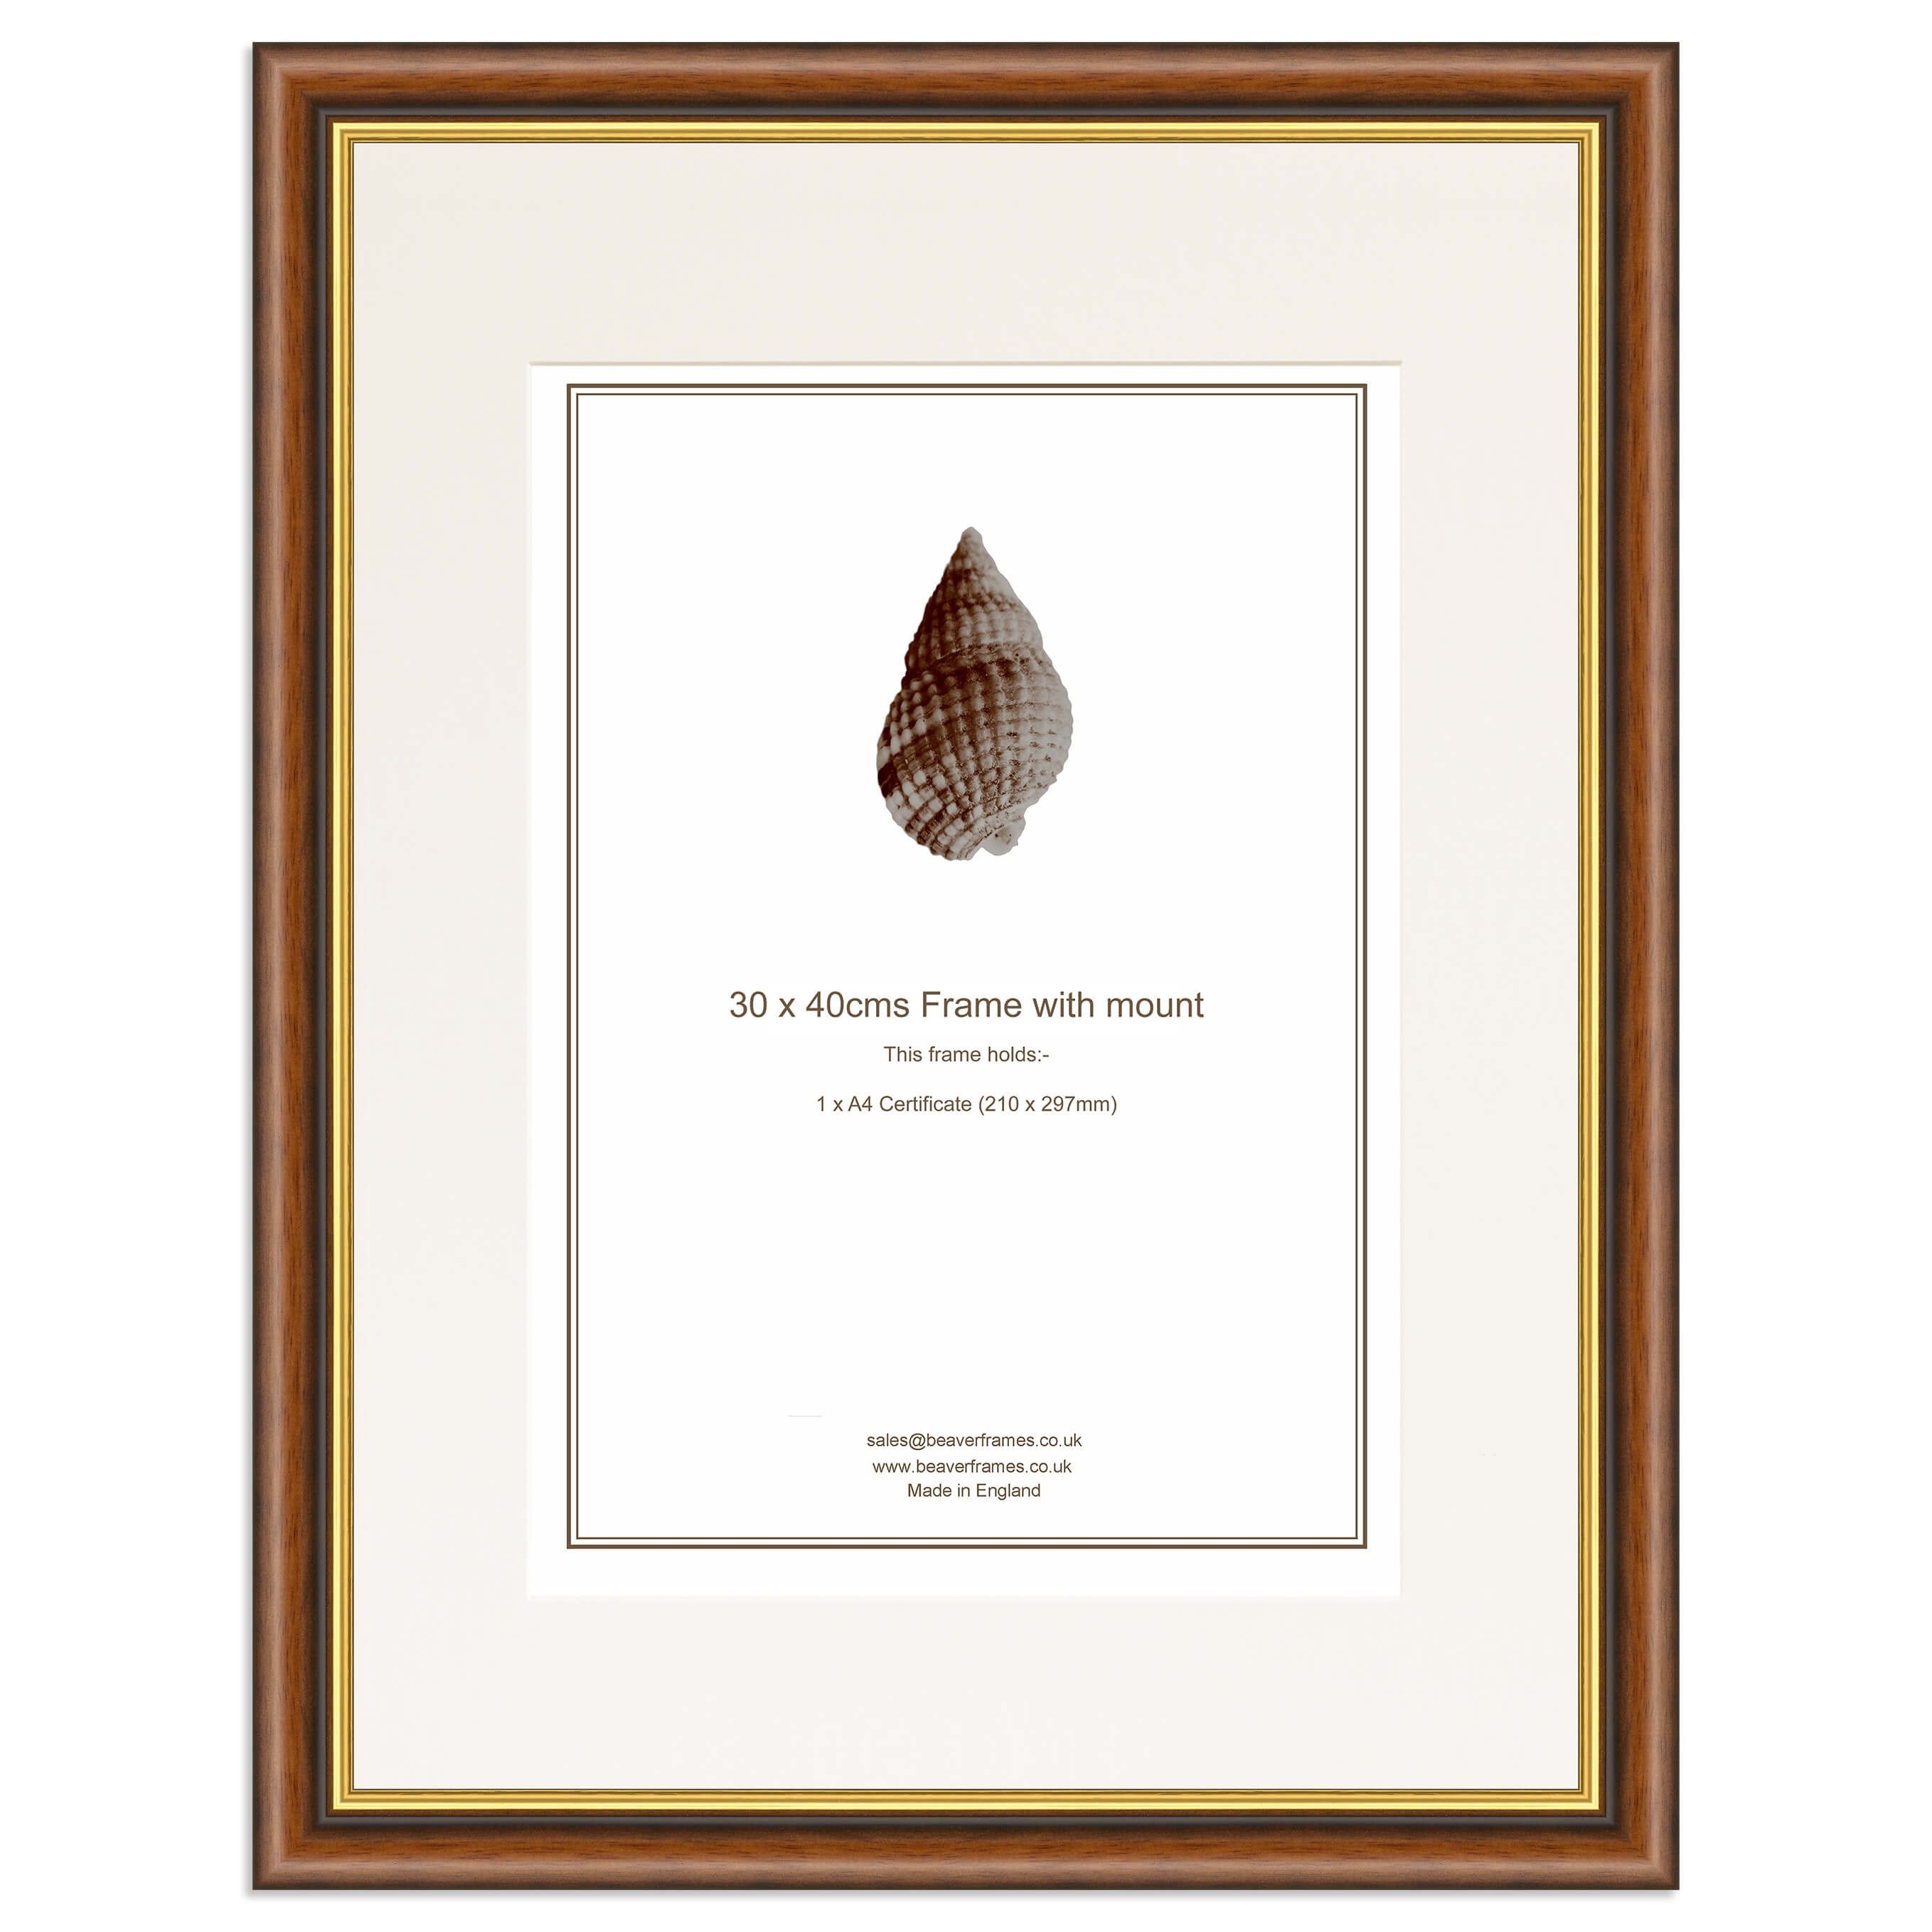 Elite Collection: Mahogany and Gold Wooden frame and mount for an A4 Certificate